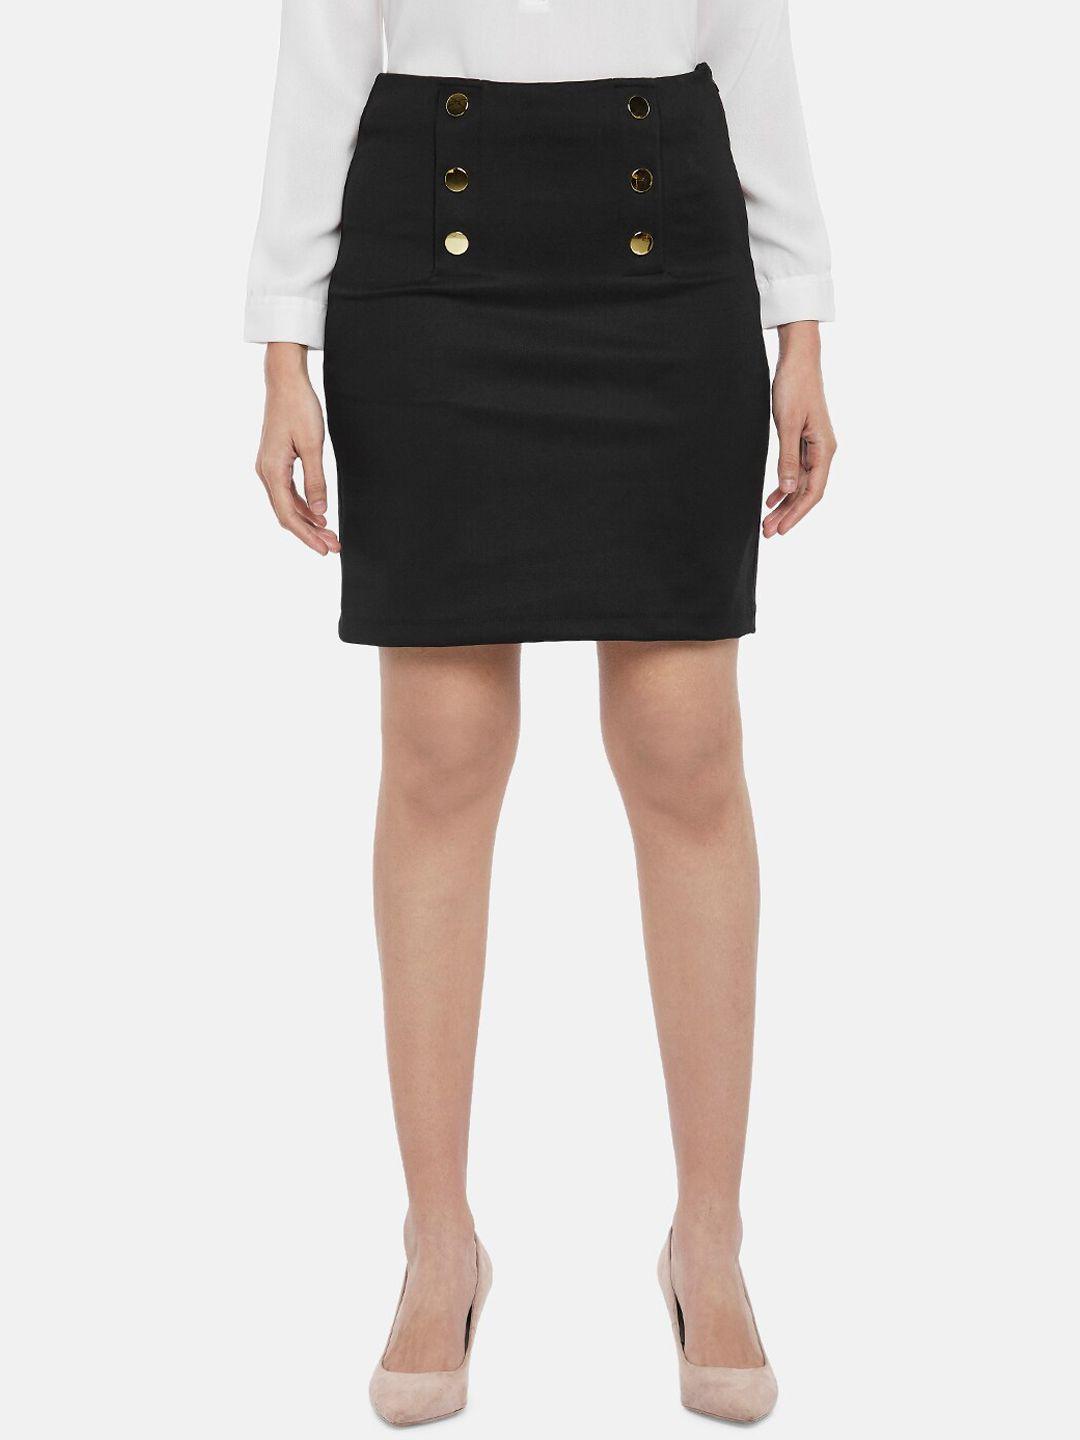 annabelle by pantaloons women black solid above knee pencil skirt